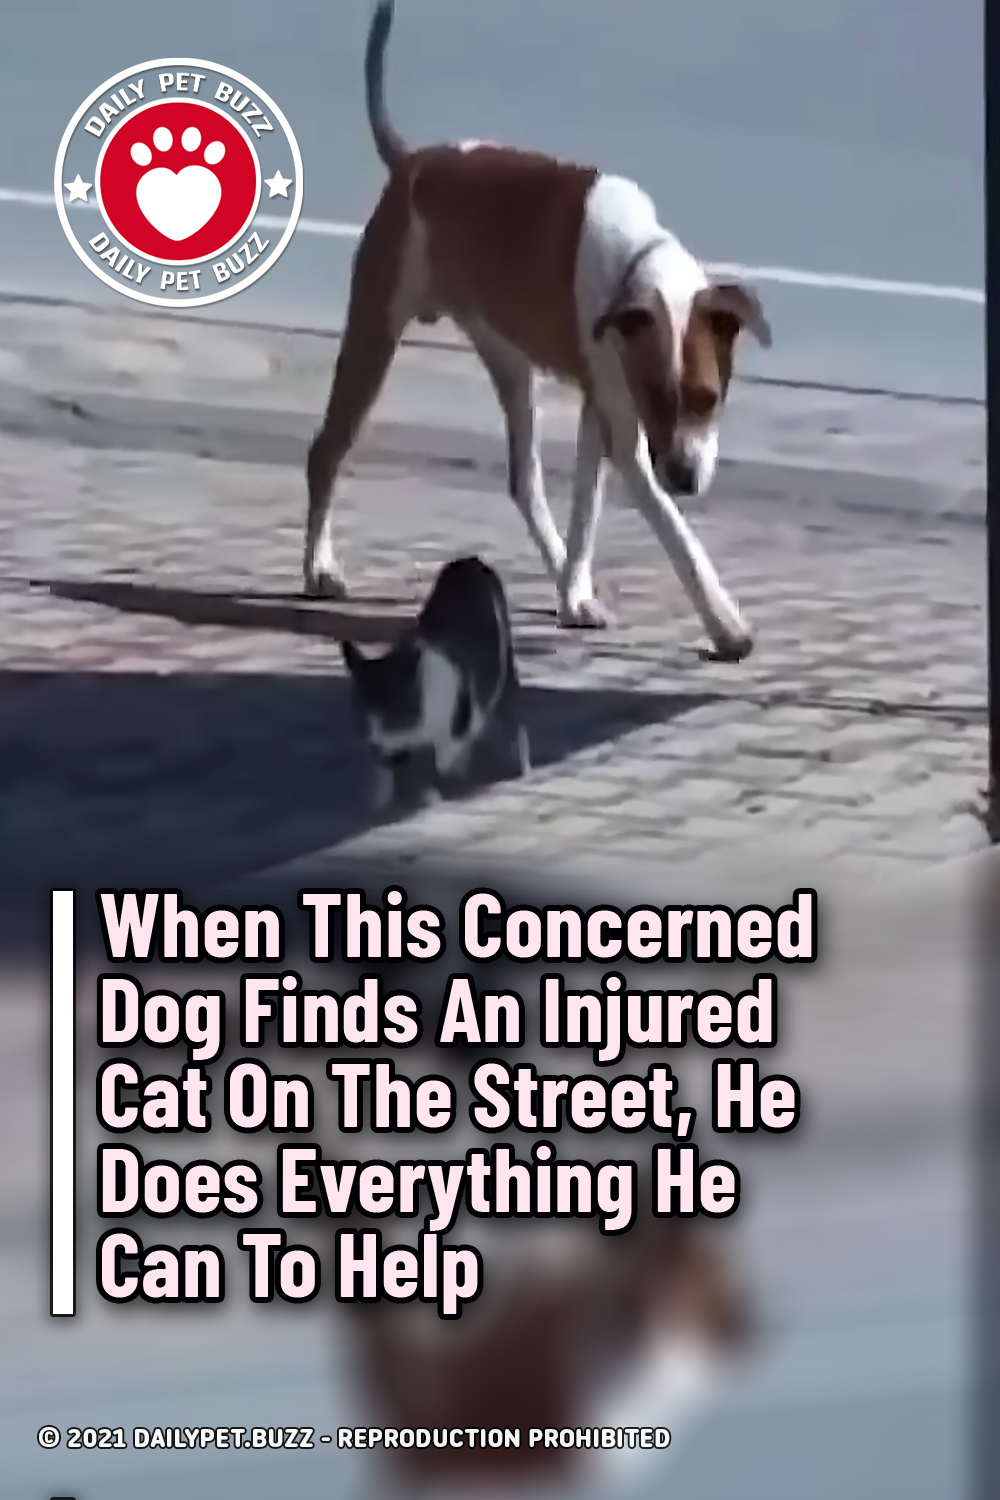 When This Concerned Dog Finds An Injured Cat On The Street, He Does Everything He Can To Help